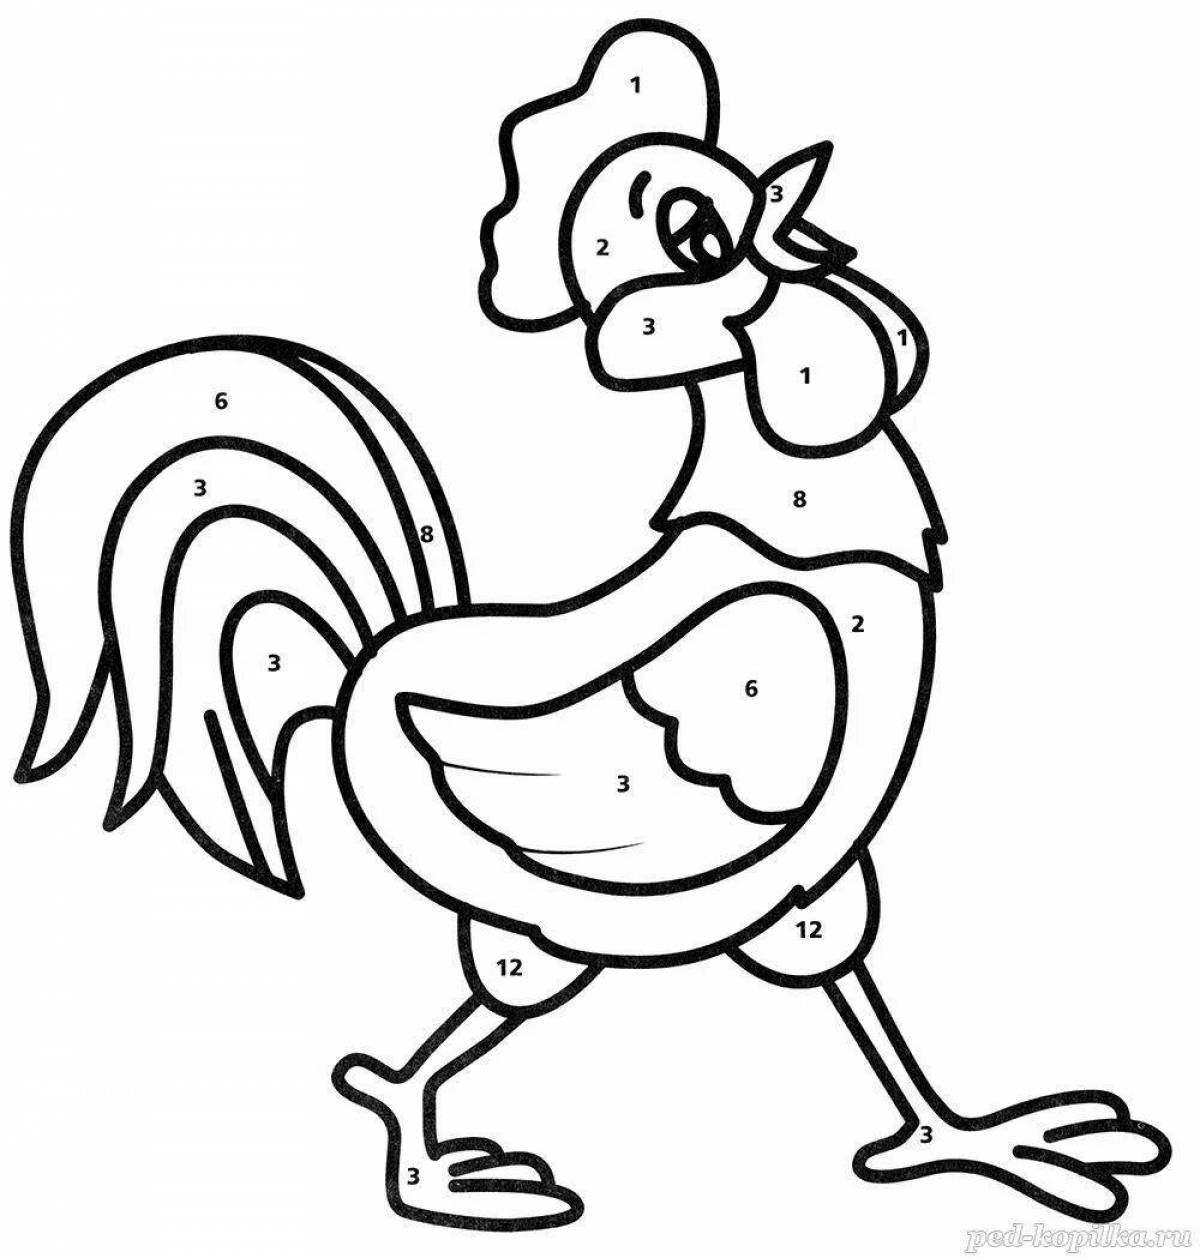 Coloring cute rooster for kids 3-4 years old